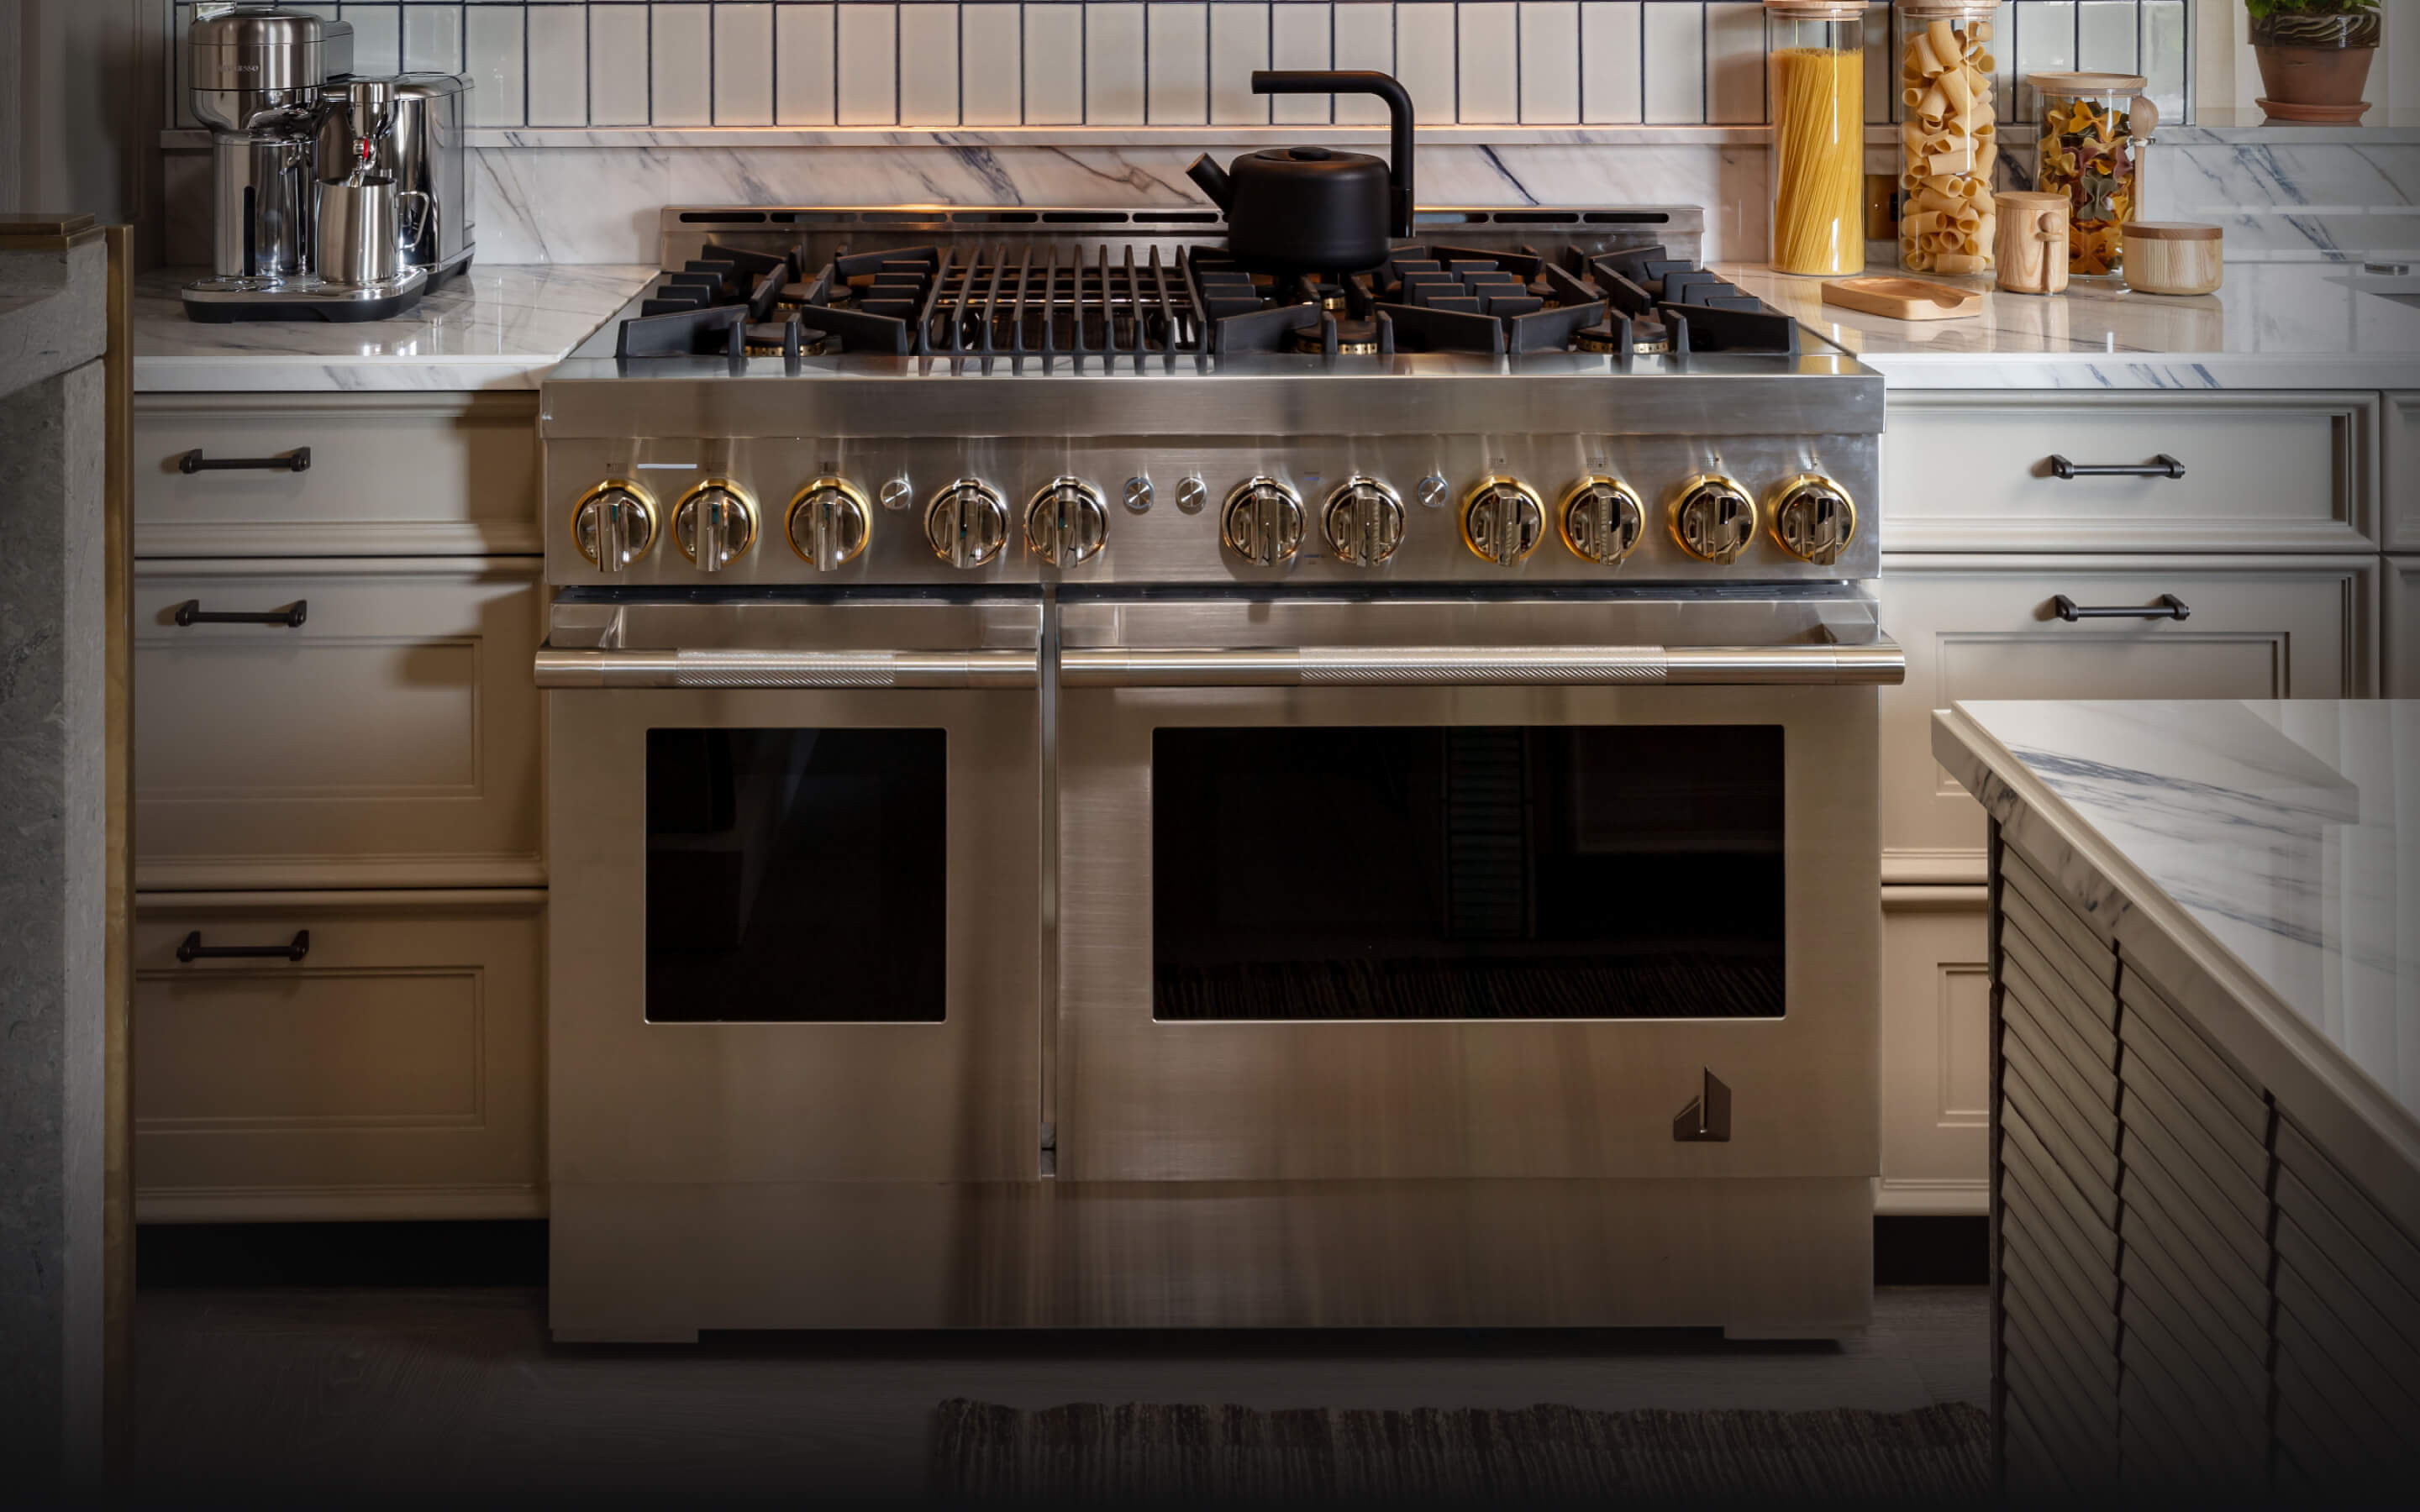  A RISE™ Professional-Style Range In a real kitchen.